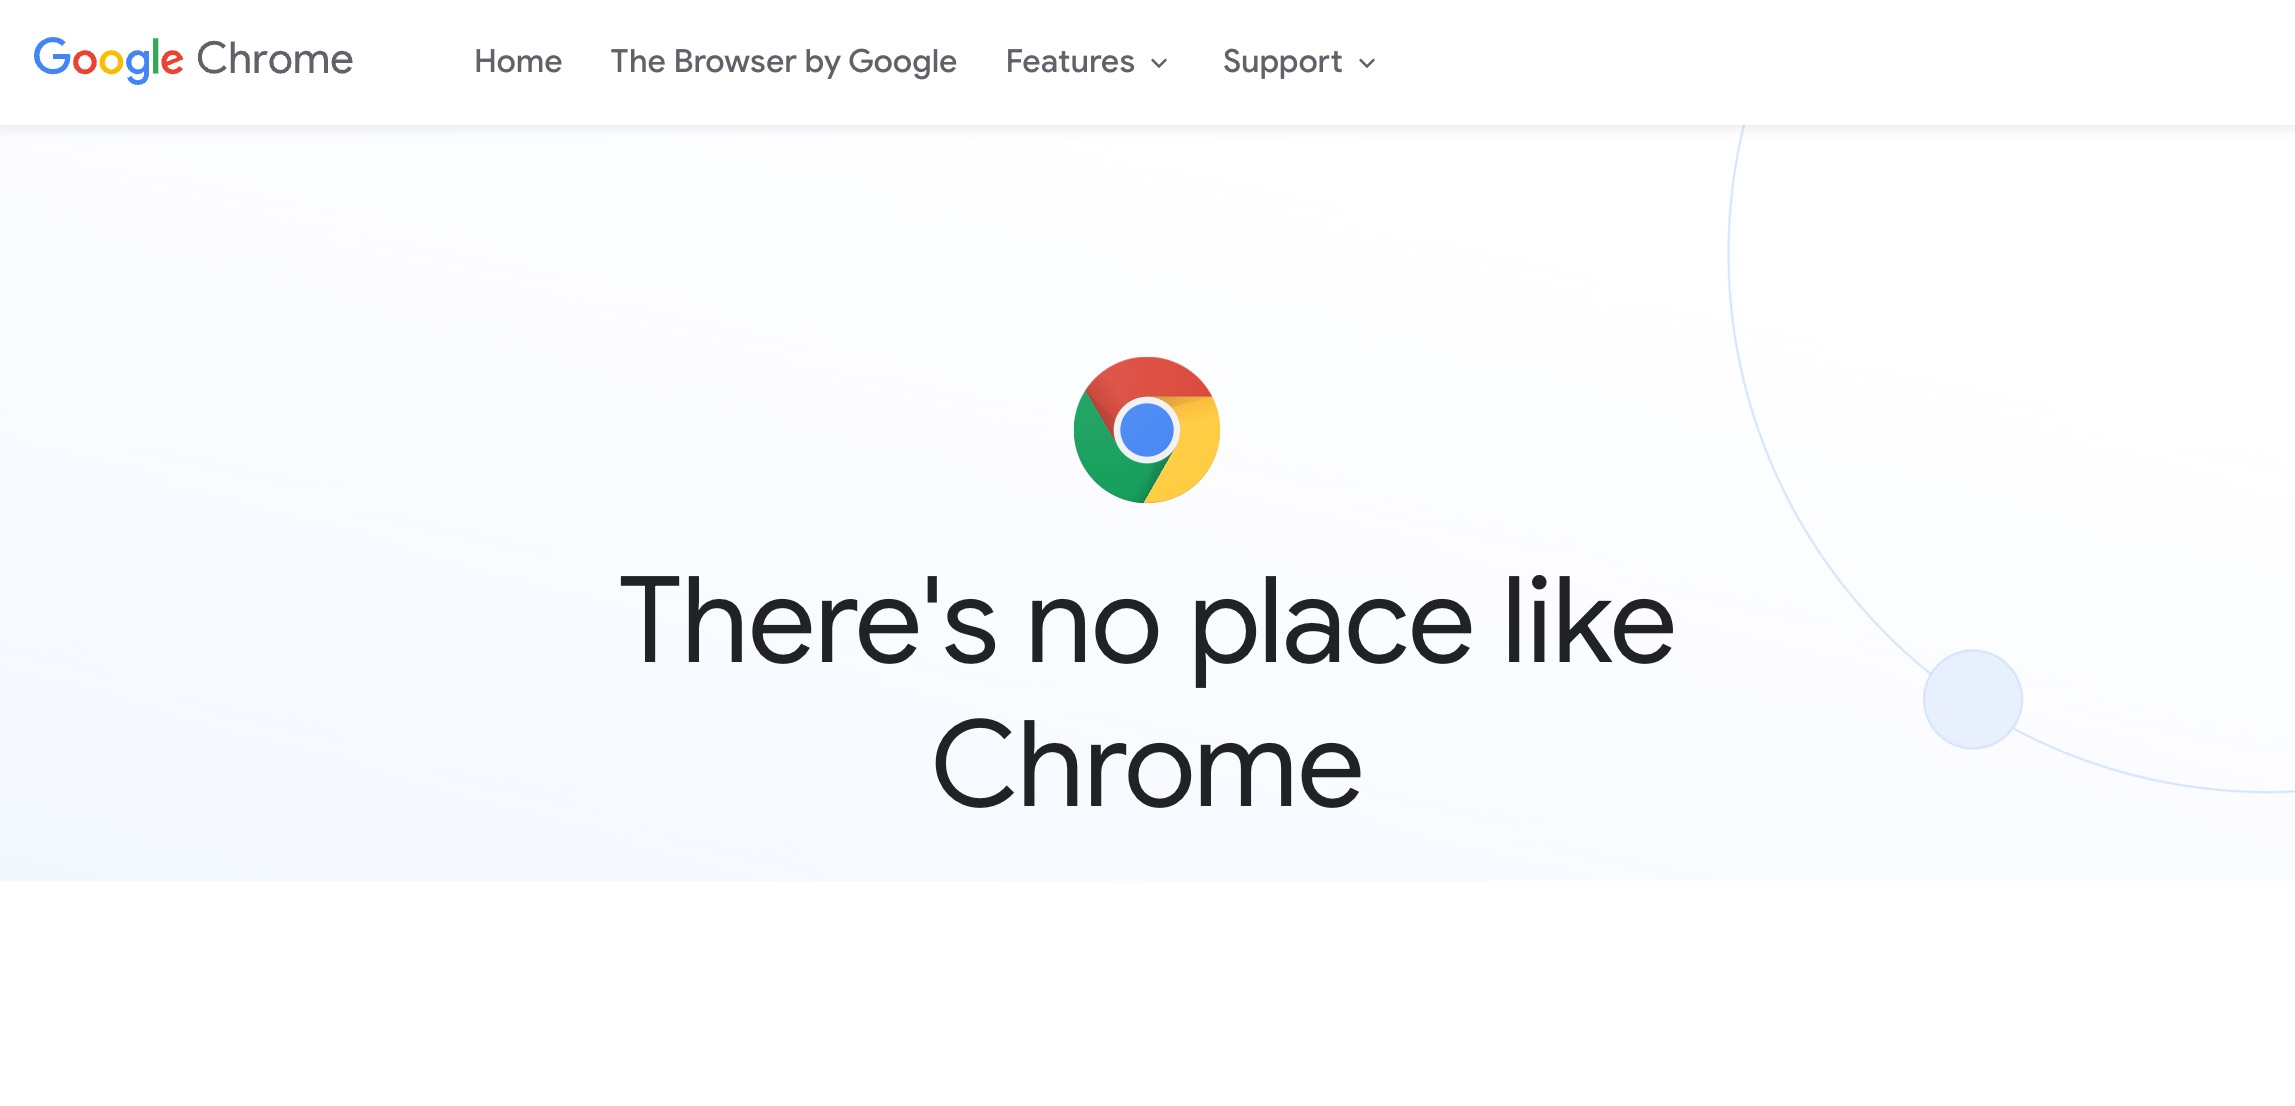 What’s New in Chrome 102: Latest Google Chrome Releases